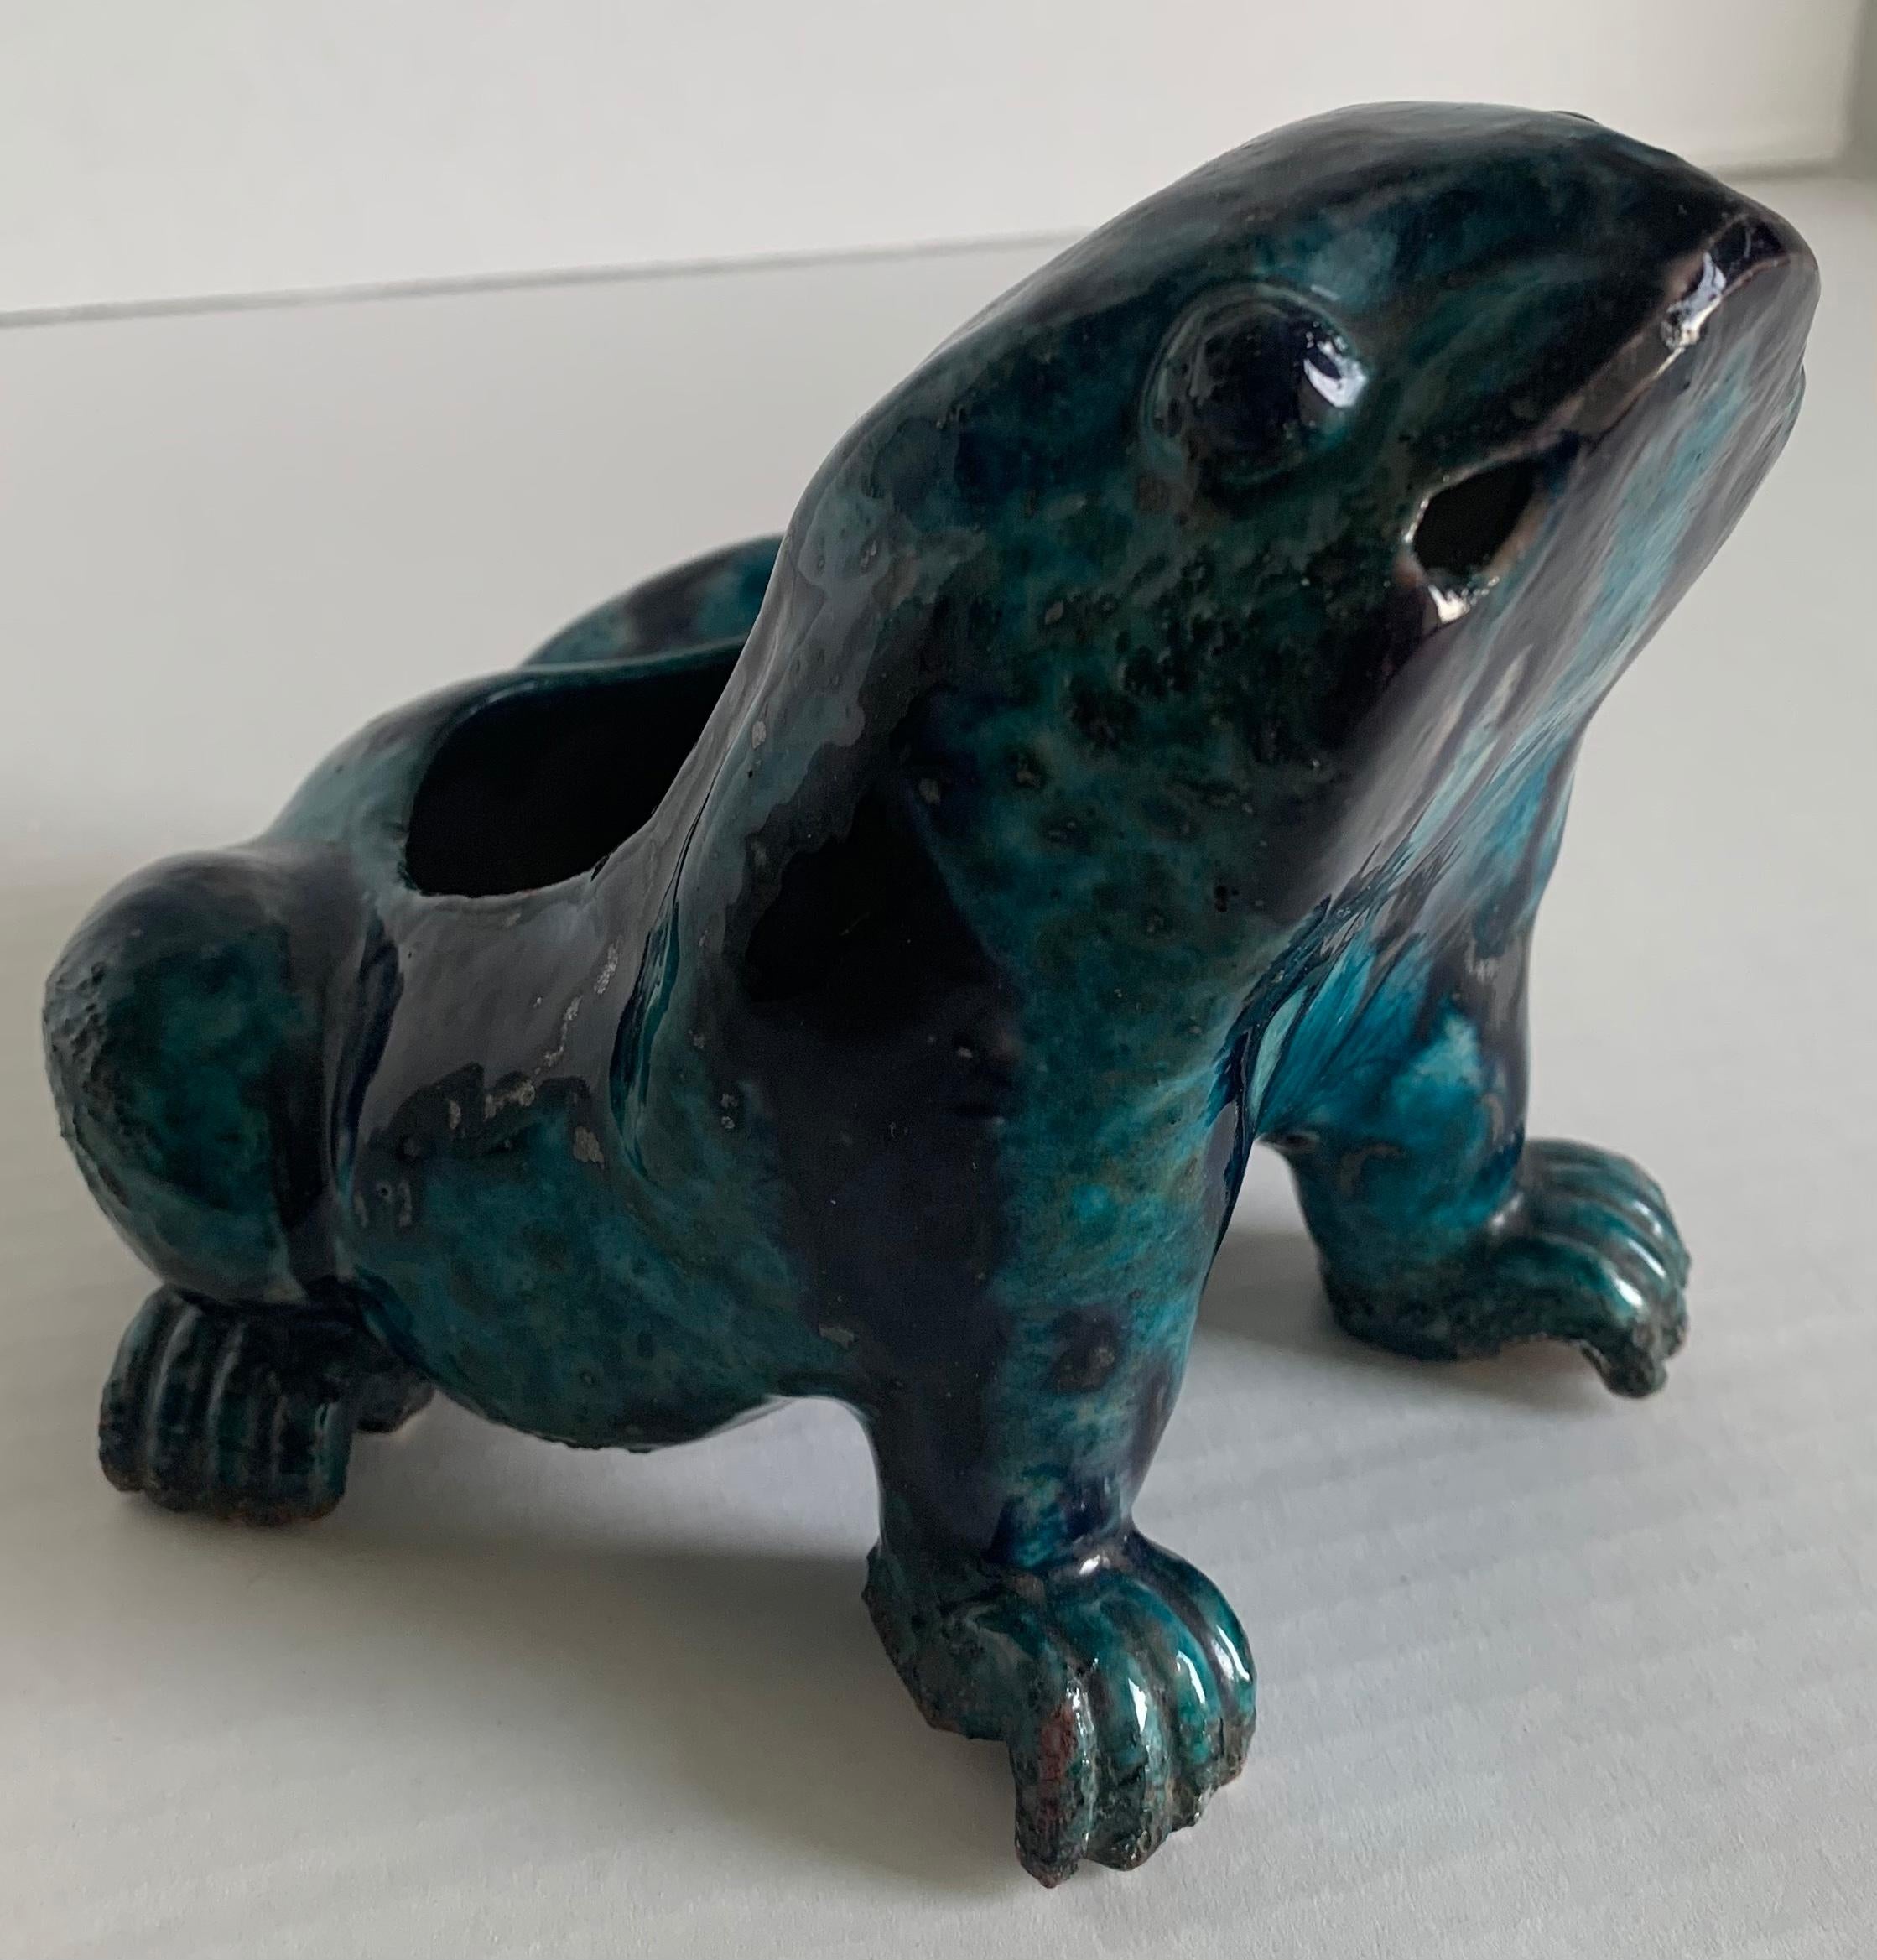 Kangxi period (1662-1722) turquoise & aubergine glazed porcelain frog. Covered in an overall rich turquoise & aubergine glaze. 
This charming frog is modeled in a seated position with its head held high in an amusing expression. 
Provenance: Ralph